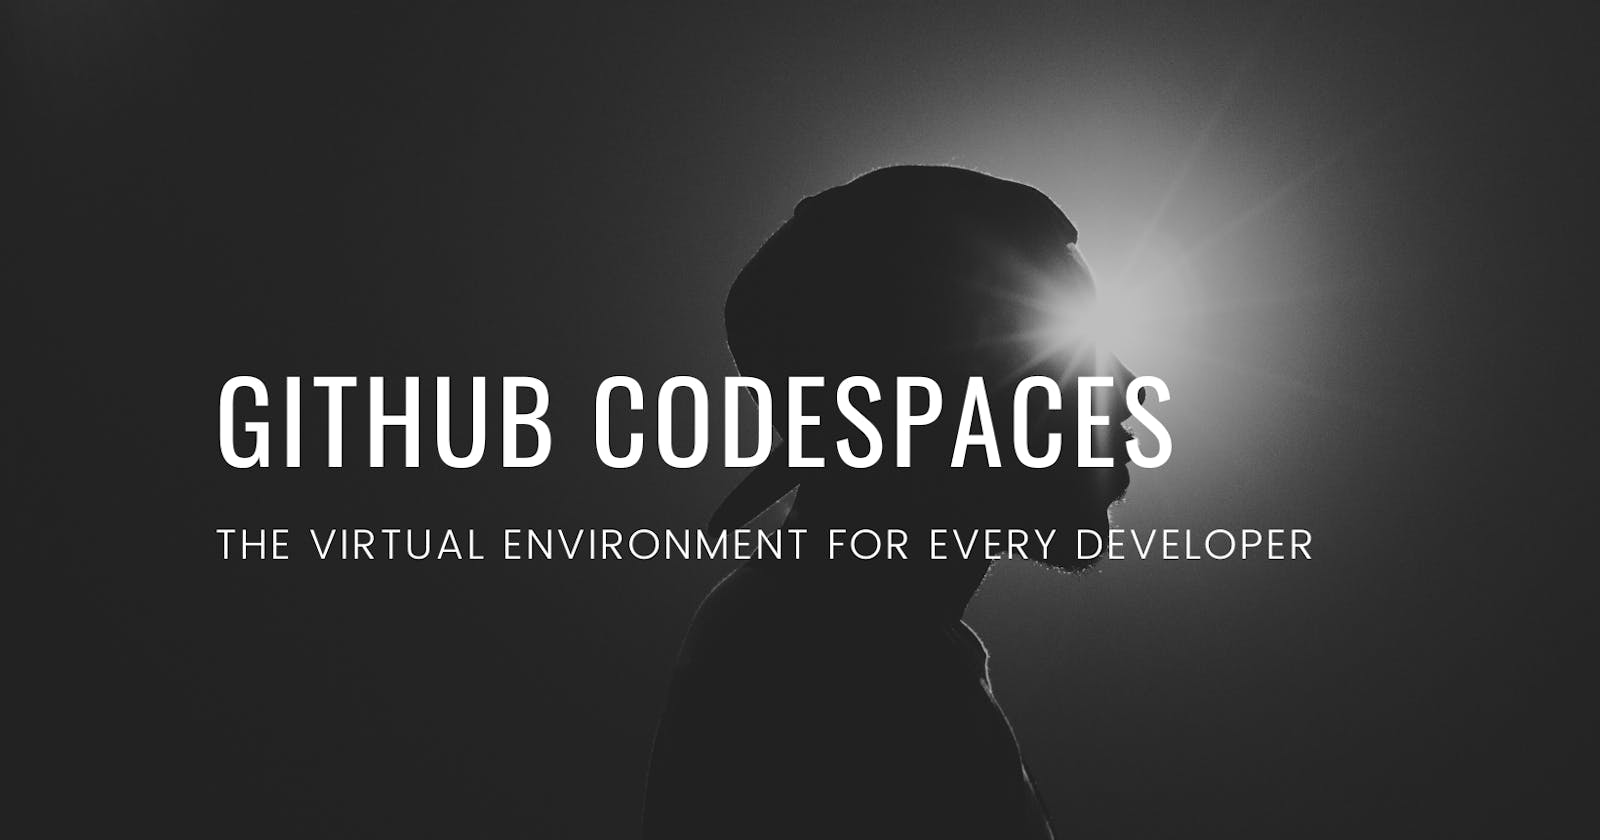 Getting Started With GitHub Codespaces